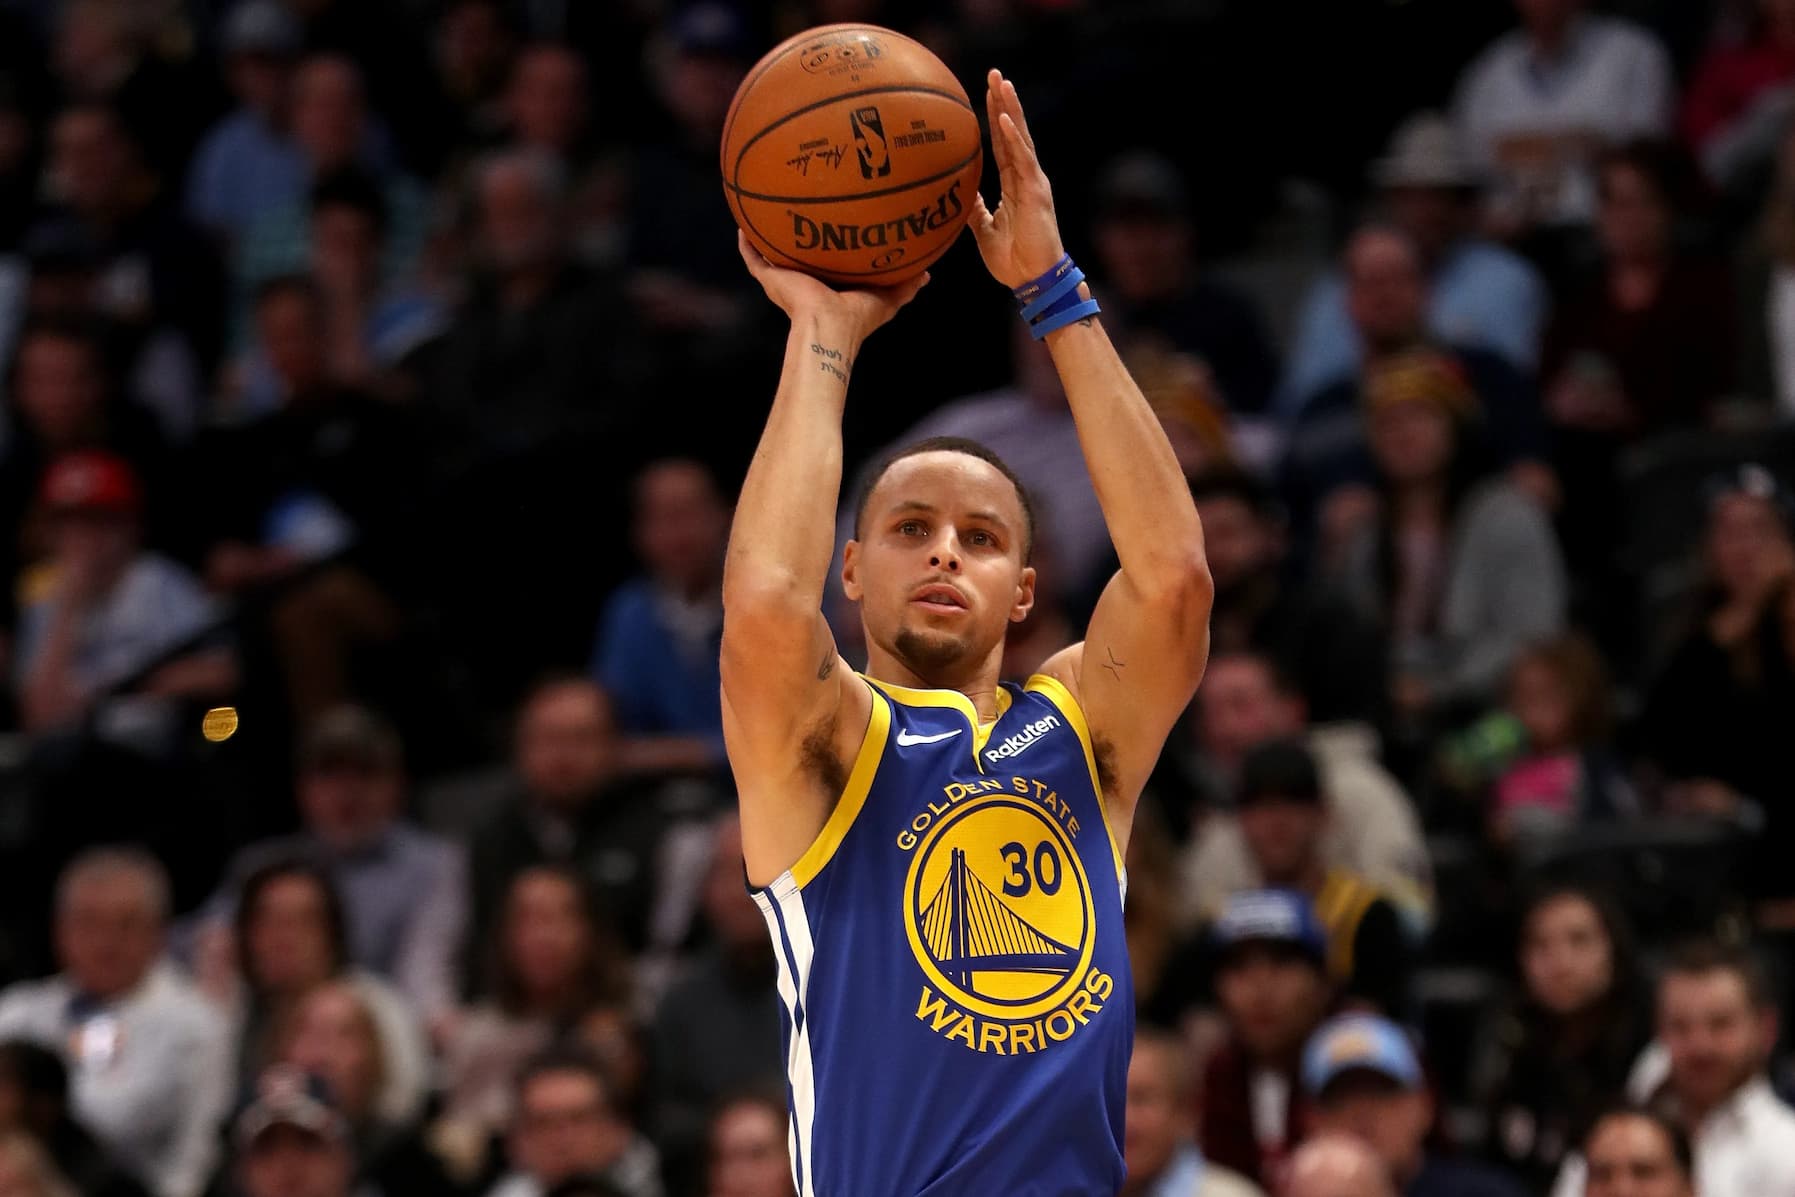 NBA Quiz: More 3 Pointers Made - Steph Curry vs 2 Star Players Combined